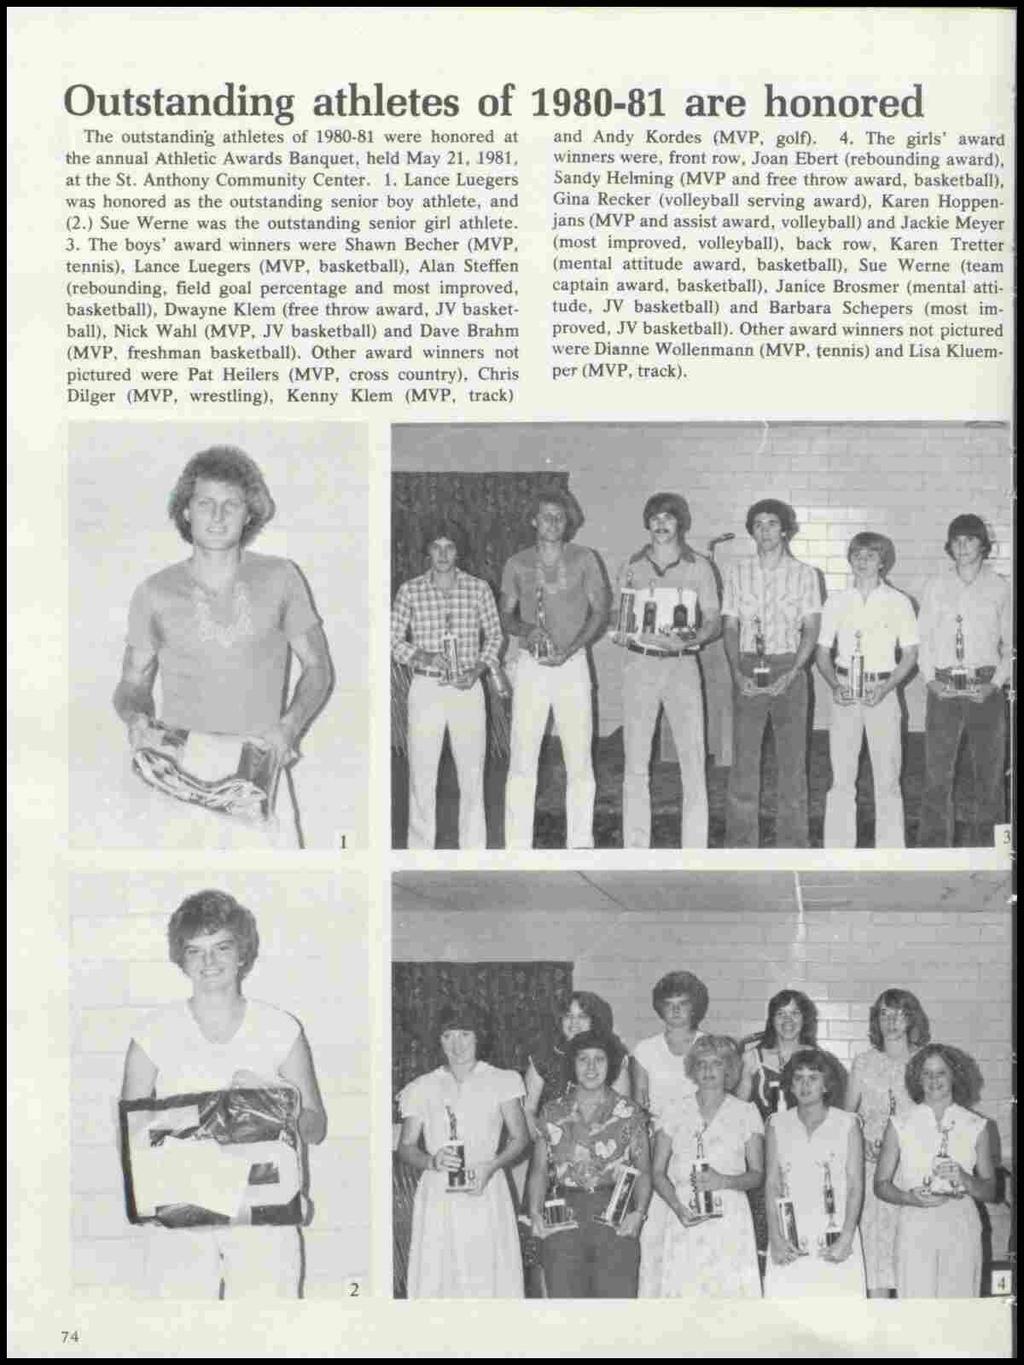 Outstanding athletes of 1980-81 are honored The outstanding athletes of 1980-81 were honored at the annual Athletic Awards Banquet~ held May 21, 1981, at the St. Anthony Community Center. 1. Lance Luegers was honored as the outstanding senior boy athlete, and (2.